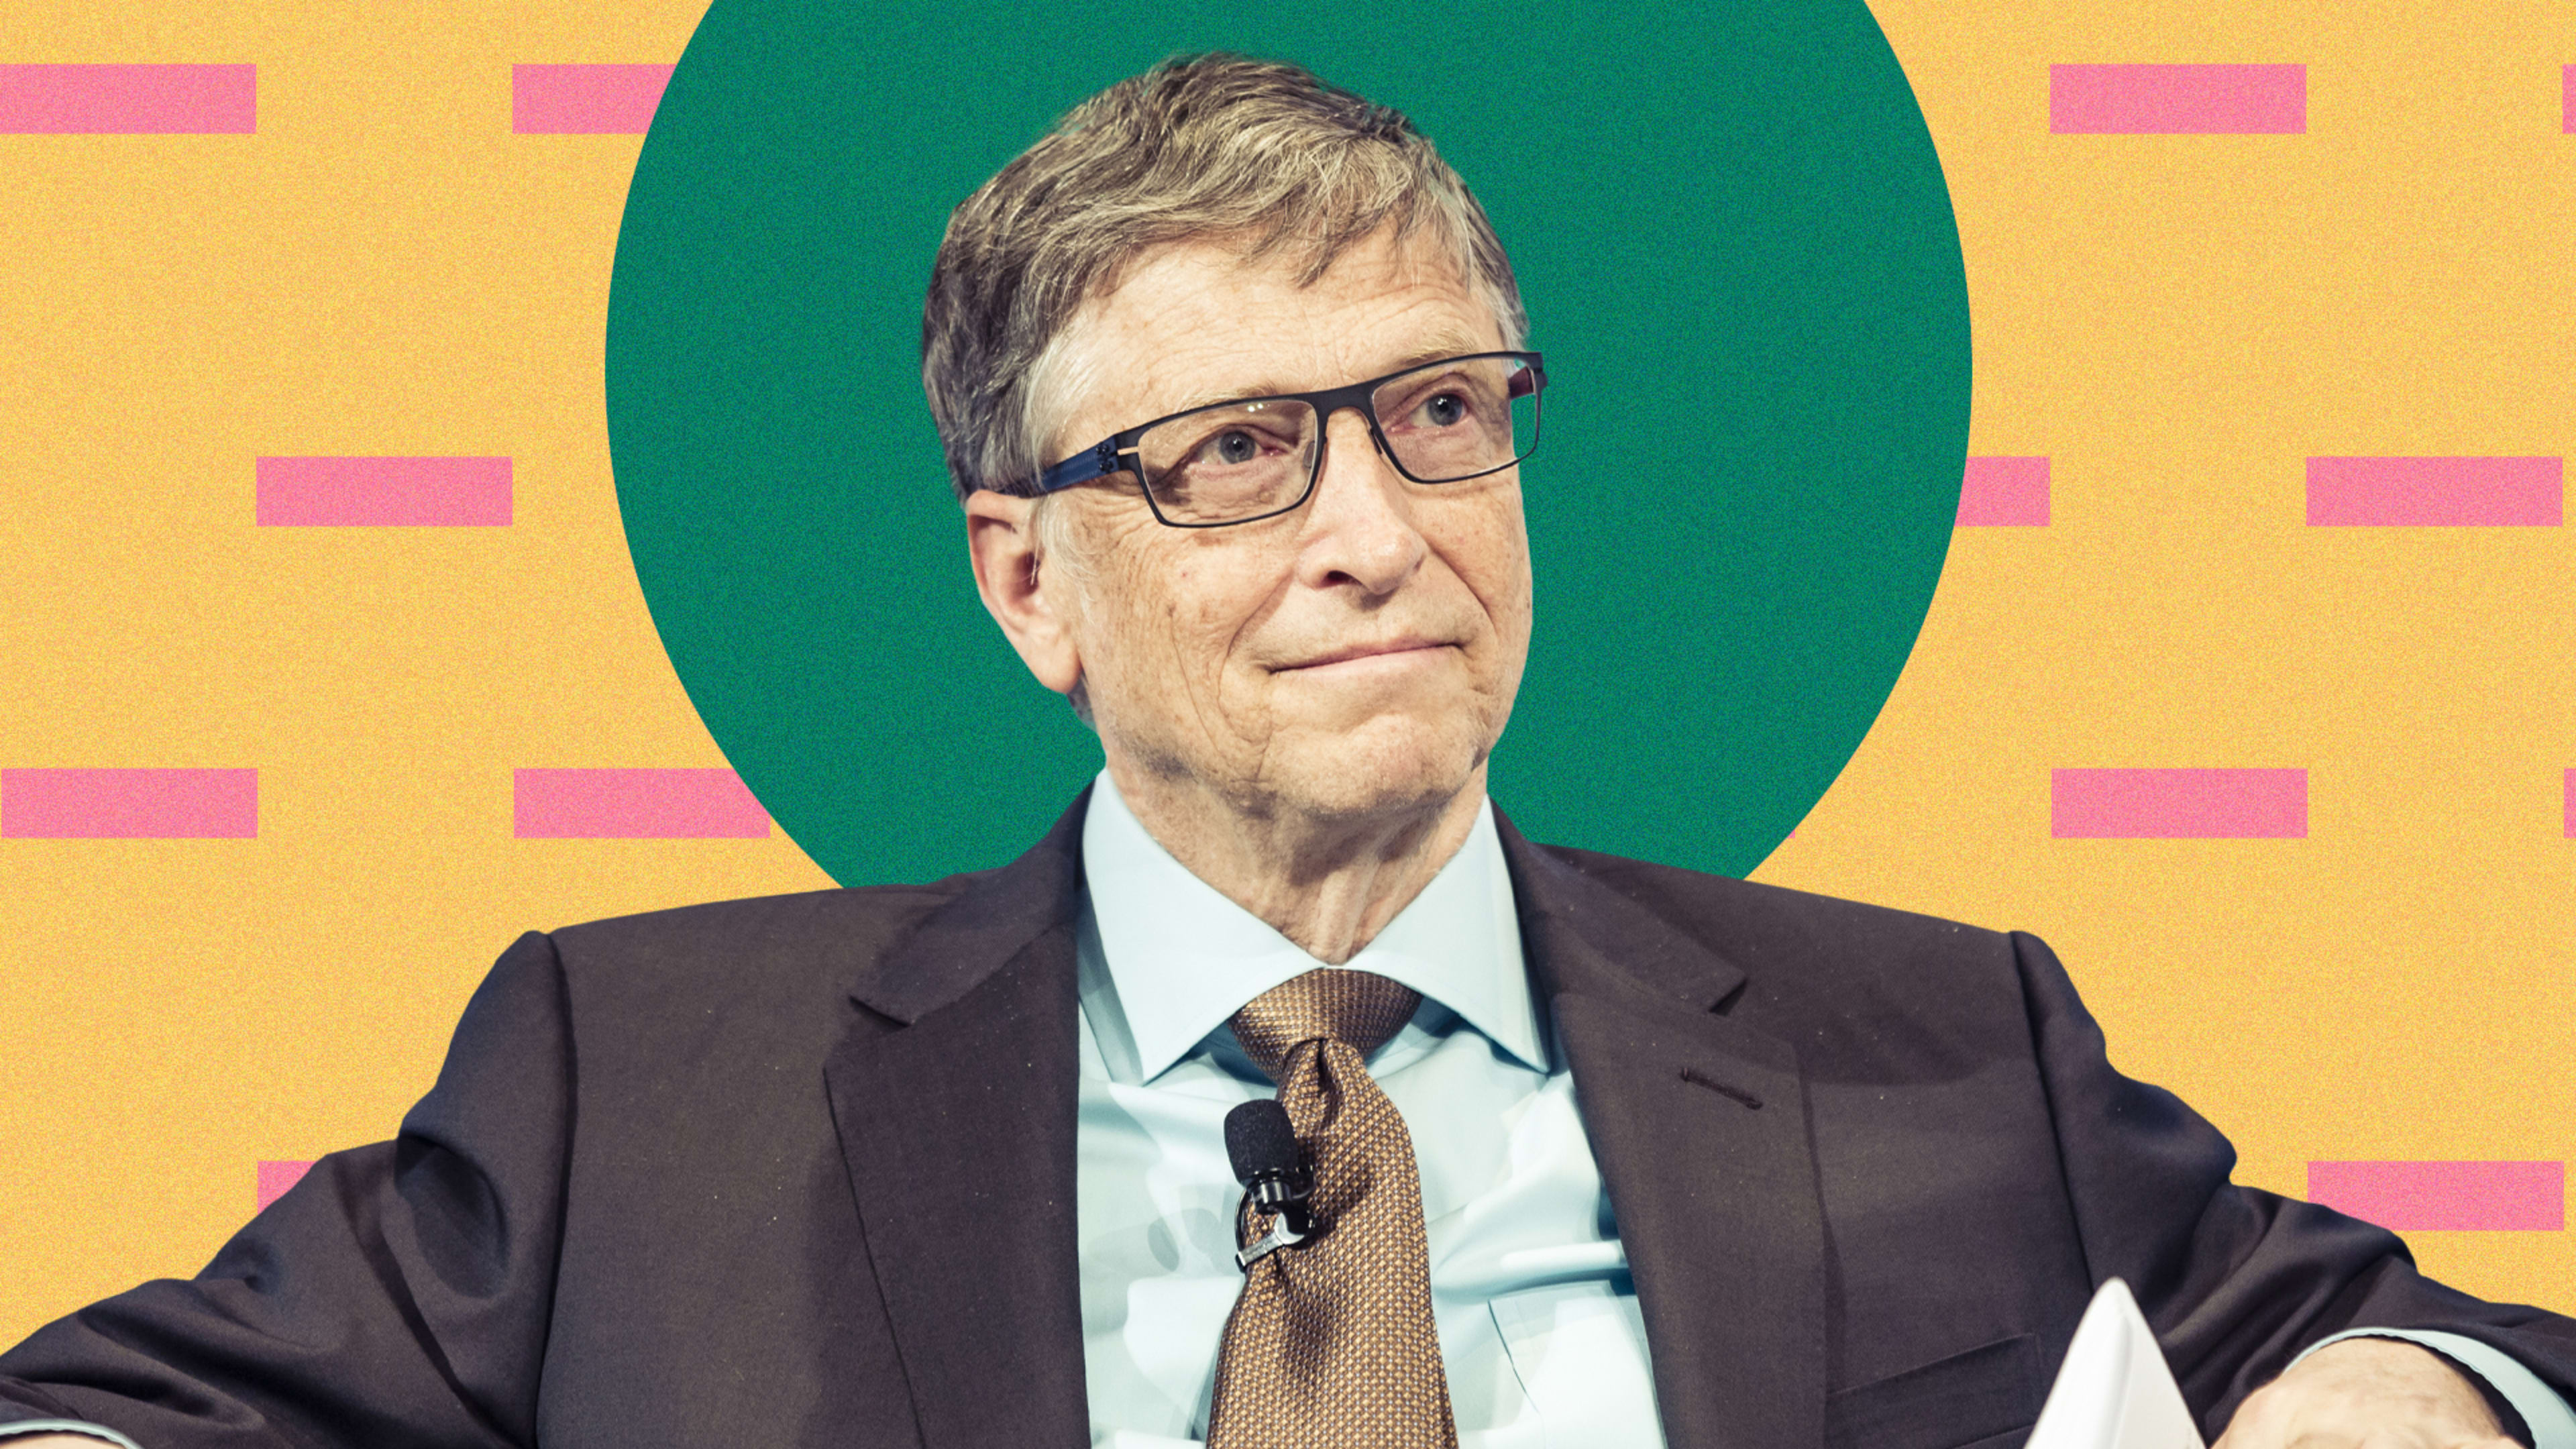 ‘It’s so bizarre’: Bill Gates finally responds to COVID-19 conspiracies about him